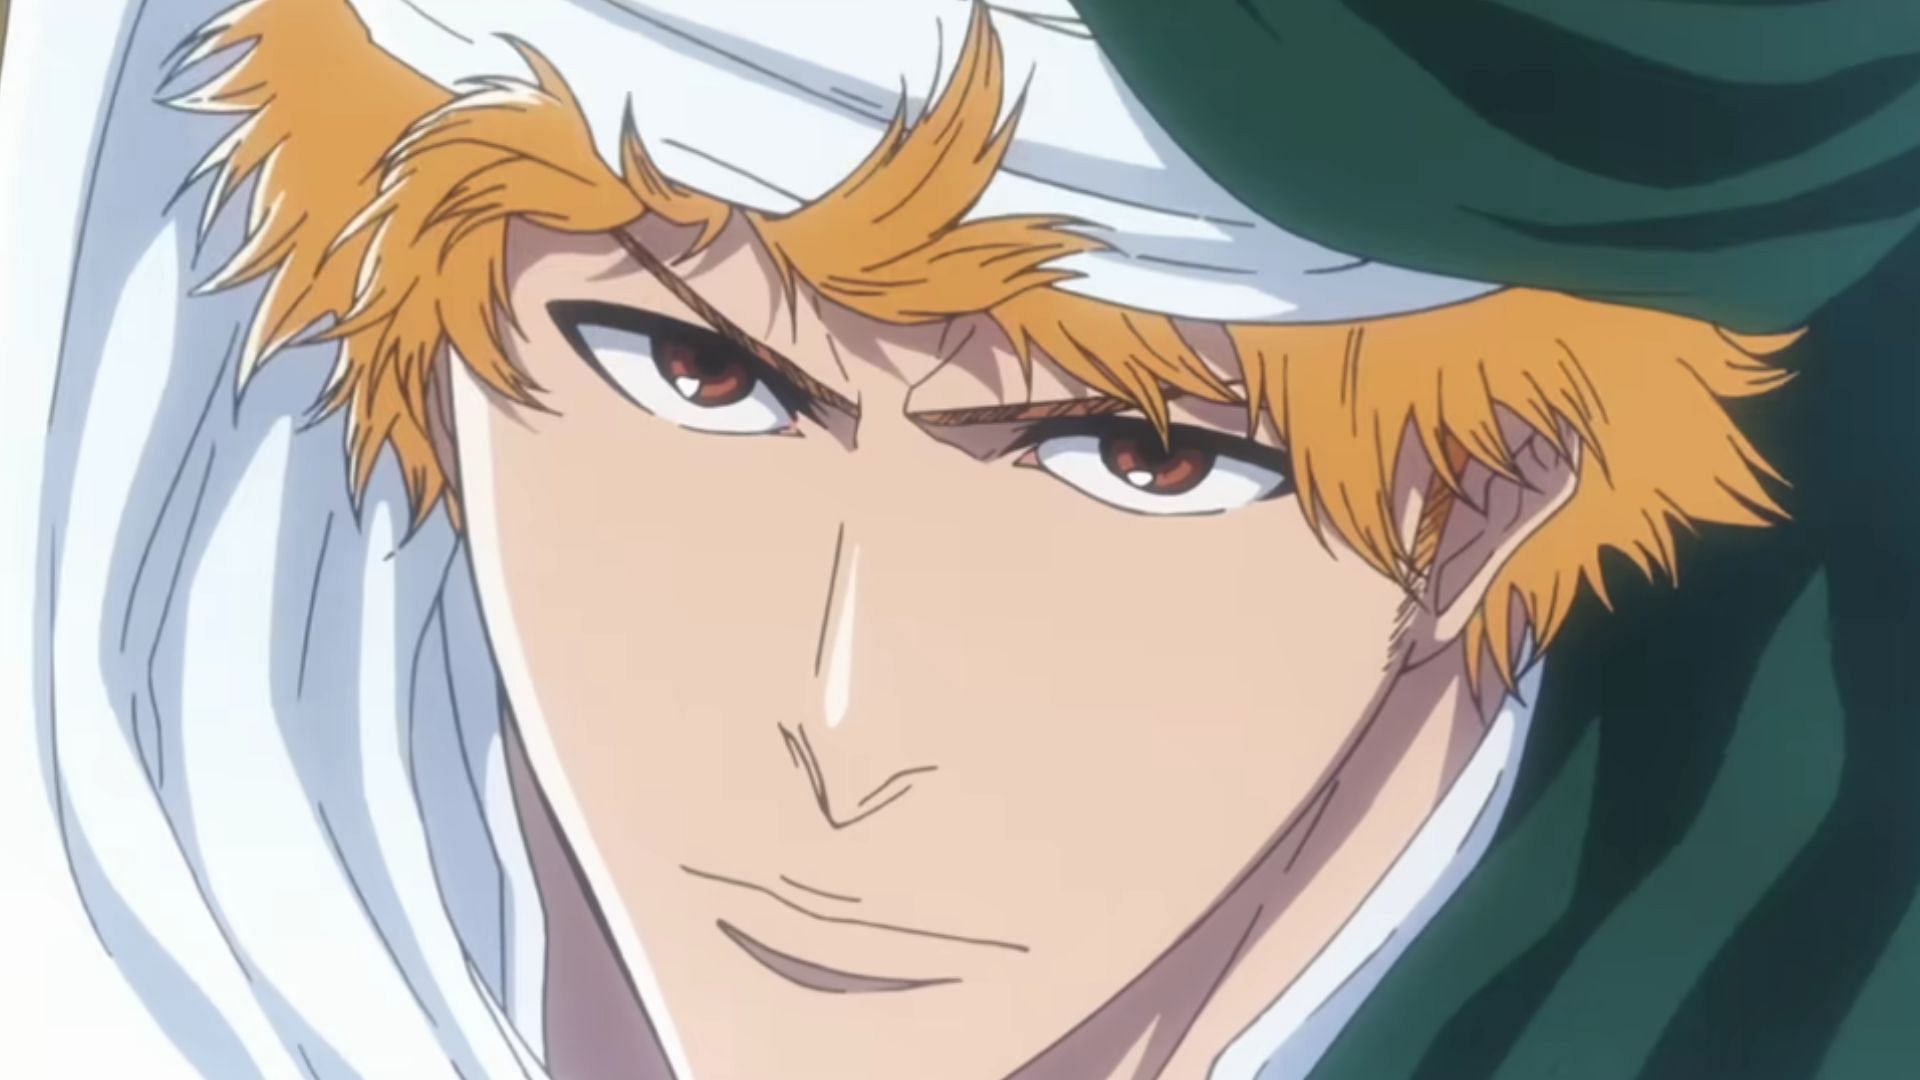 BLEACH: TYBW Part 2 Gets New Visual, Early Screening for First 2